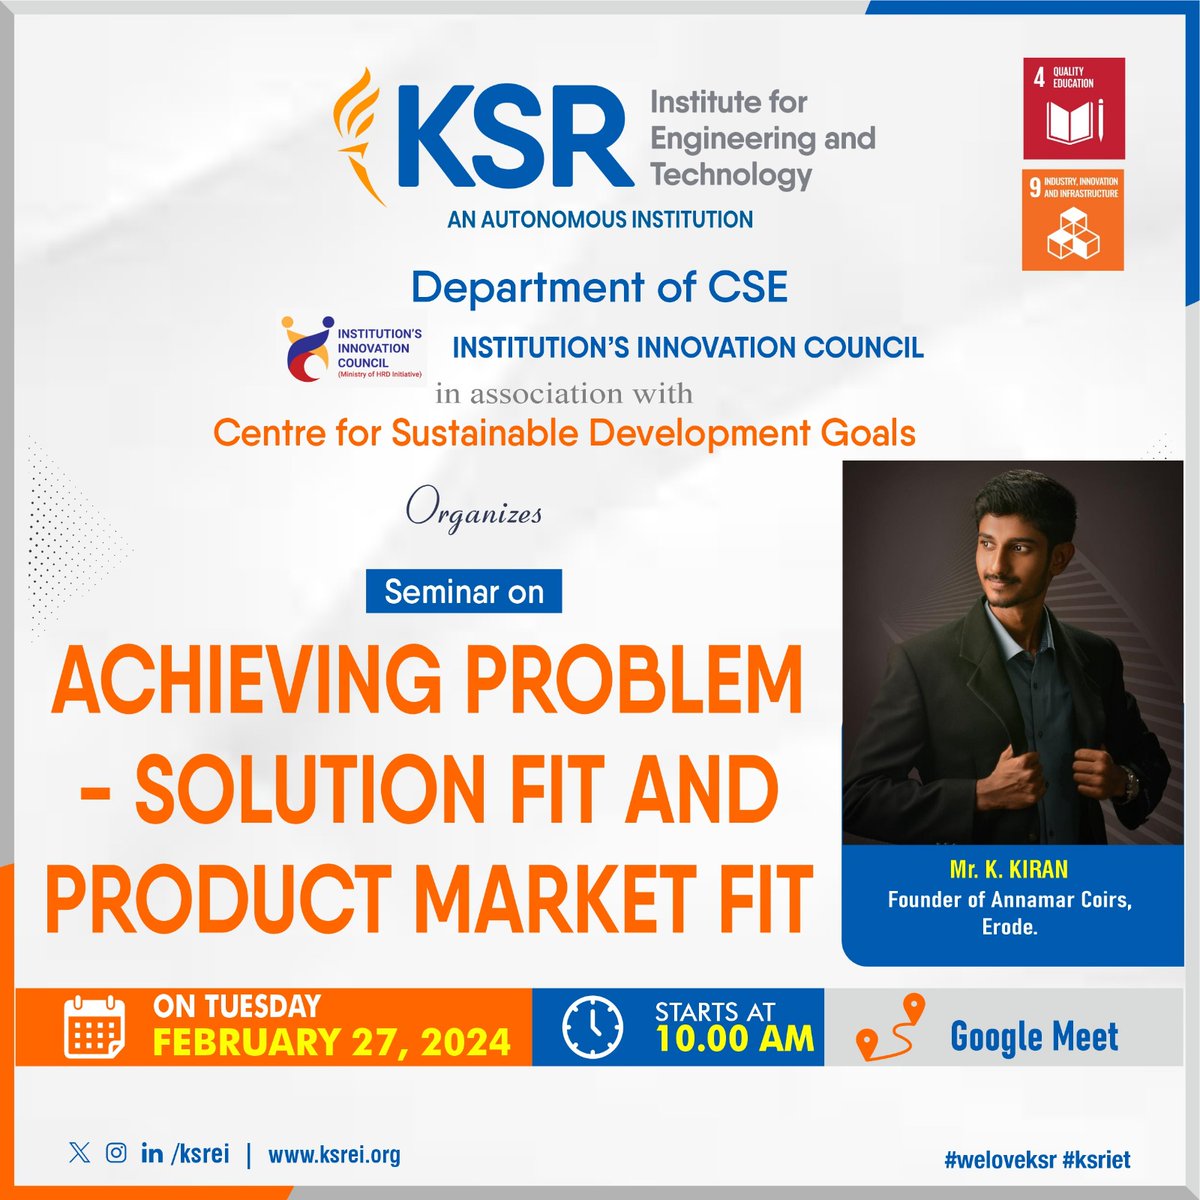 Session on Achieving Problem-Solution Fit And Product Market Fit organized by IIC & Department of computer science and engineering &CSDG

#weloveksr #ksrei #ksriet #iic #csdg #problemsolutionfit
#productmarketfit